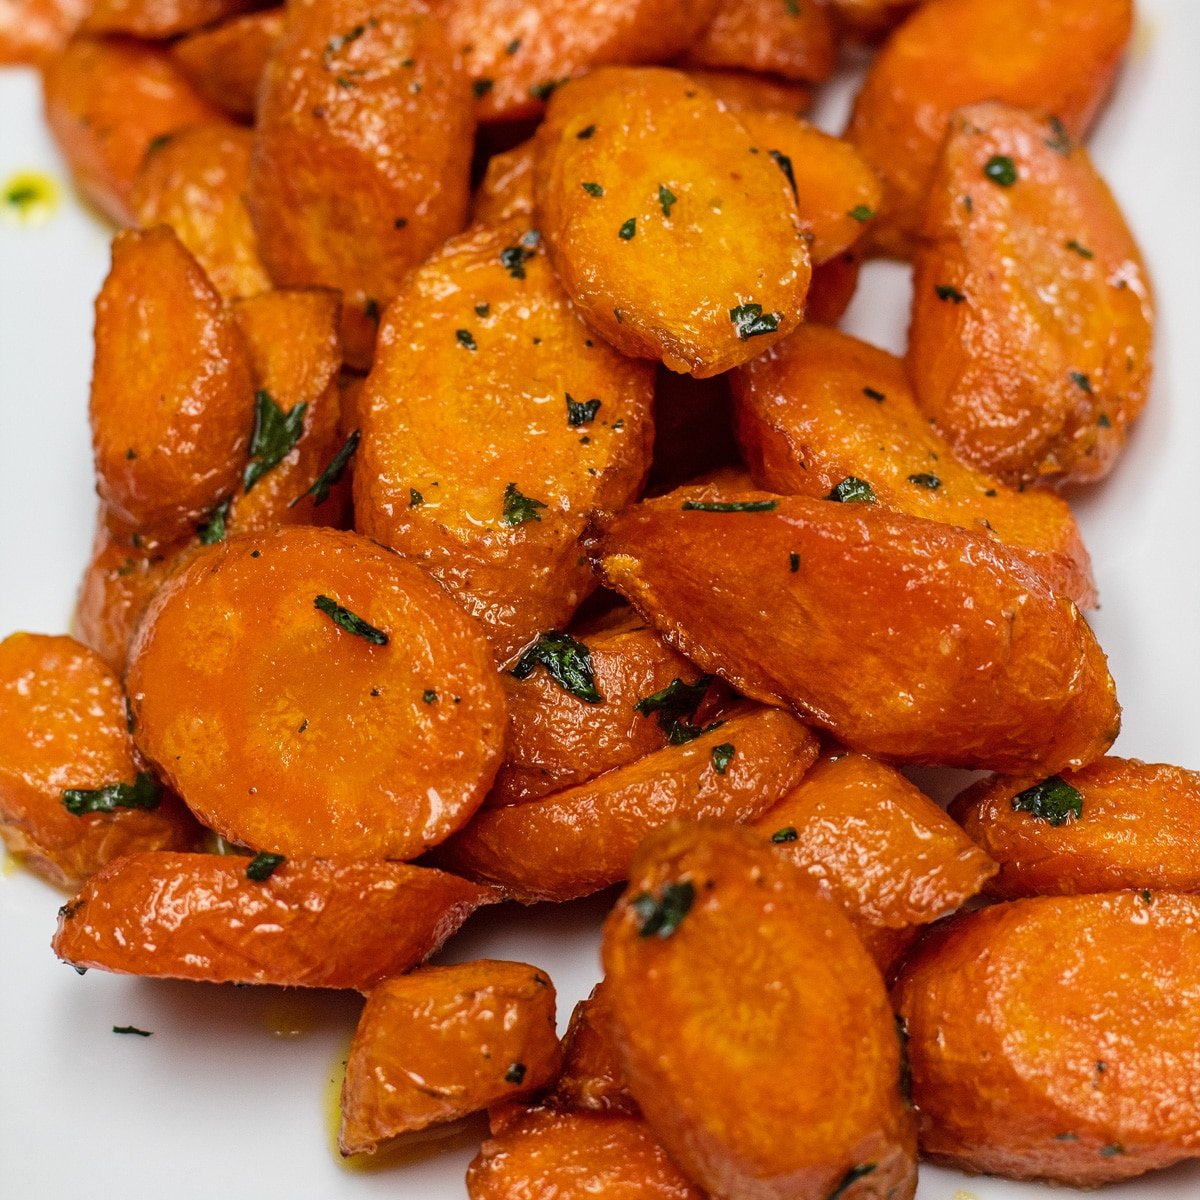 Easy air fryer carrots cooked to tender perfection and served on a white plate.